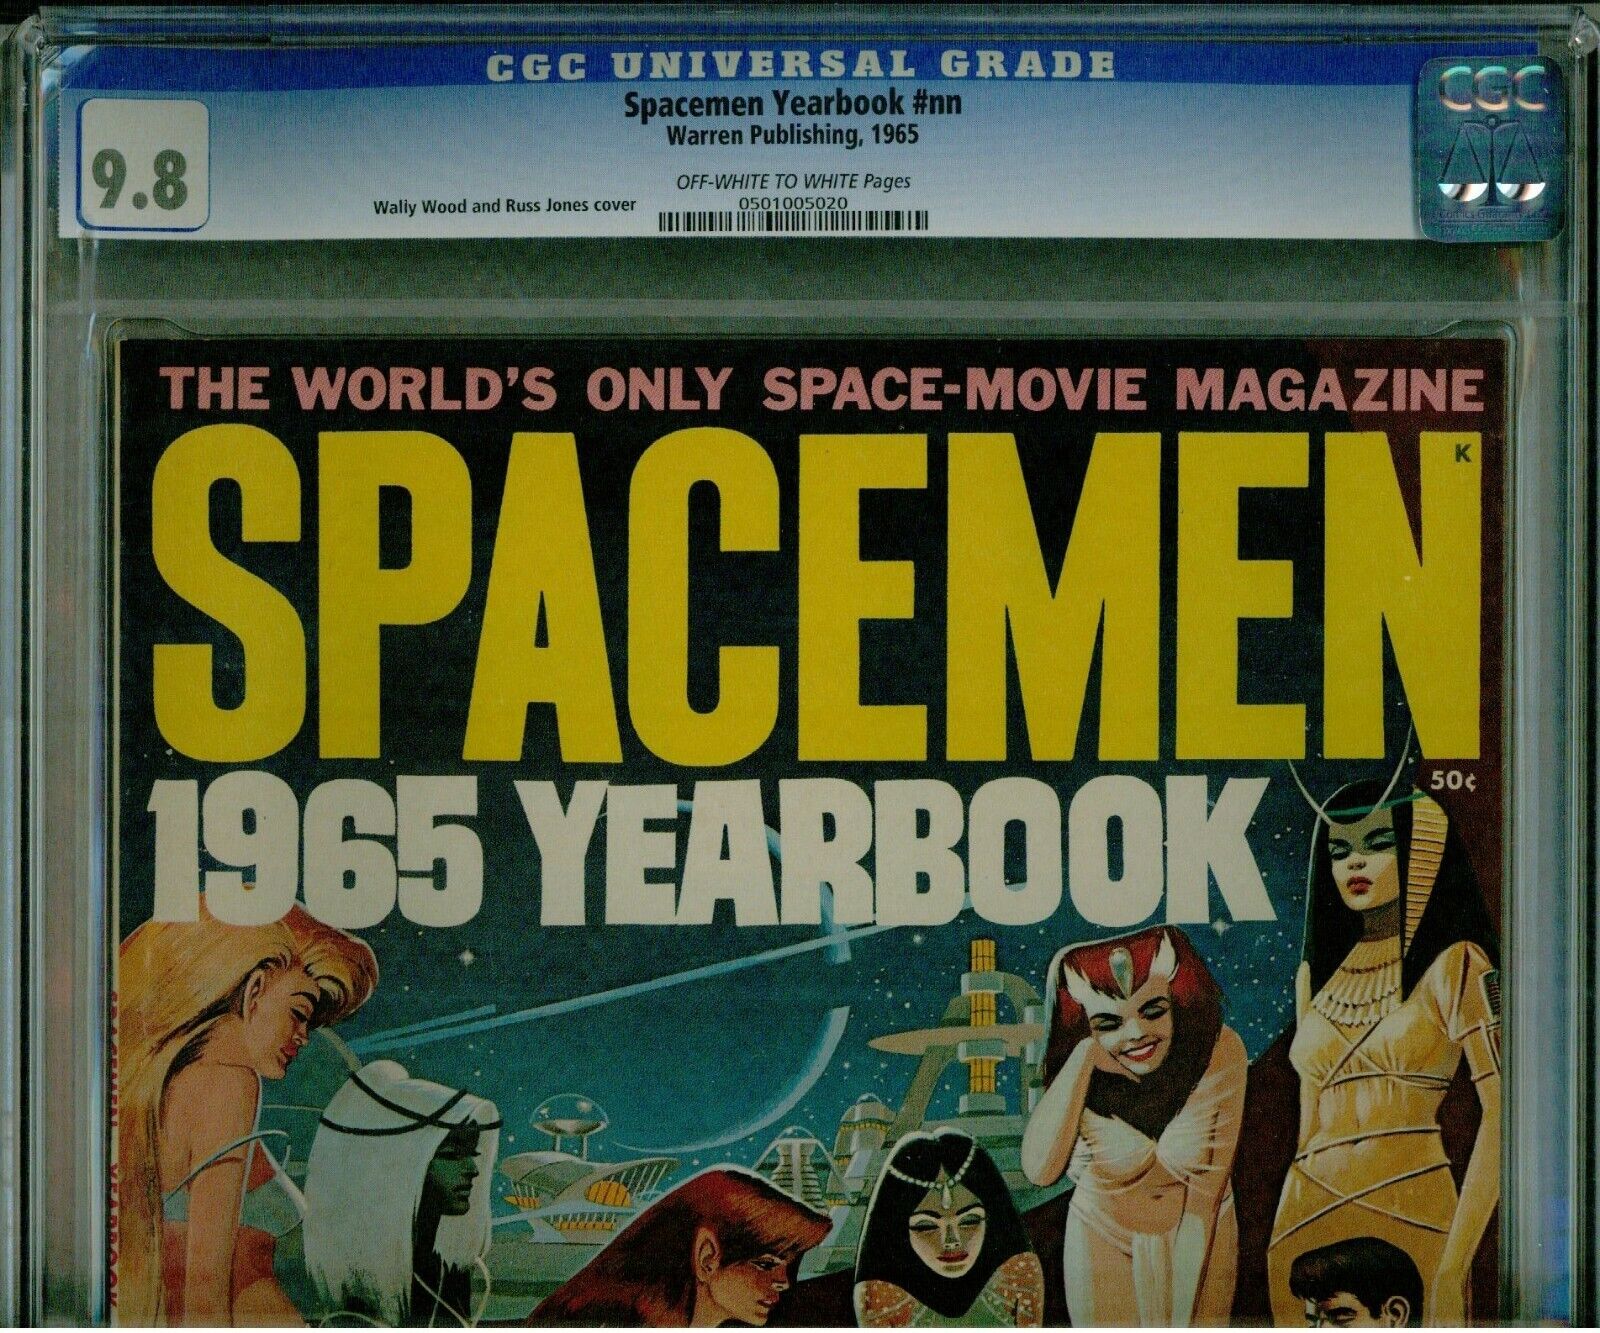 SPACEMEN YEAR BOOK #NN 1965 CGC 9.8 MINT WALLY WOOD COVER 1 OF 1 SINGLE HIGHEST